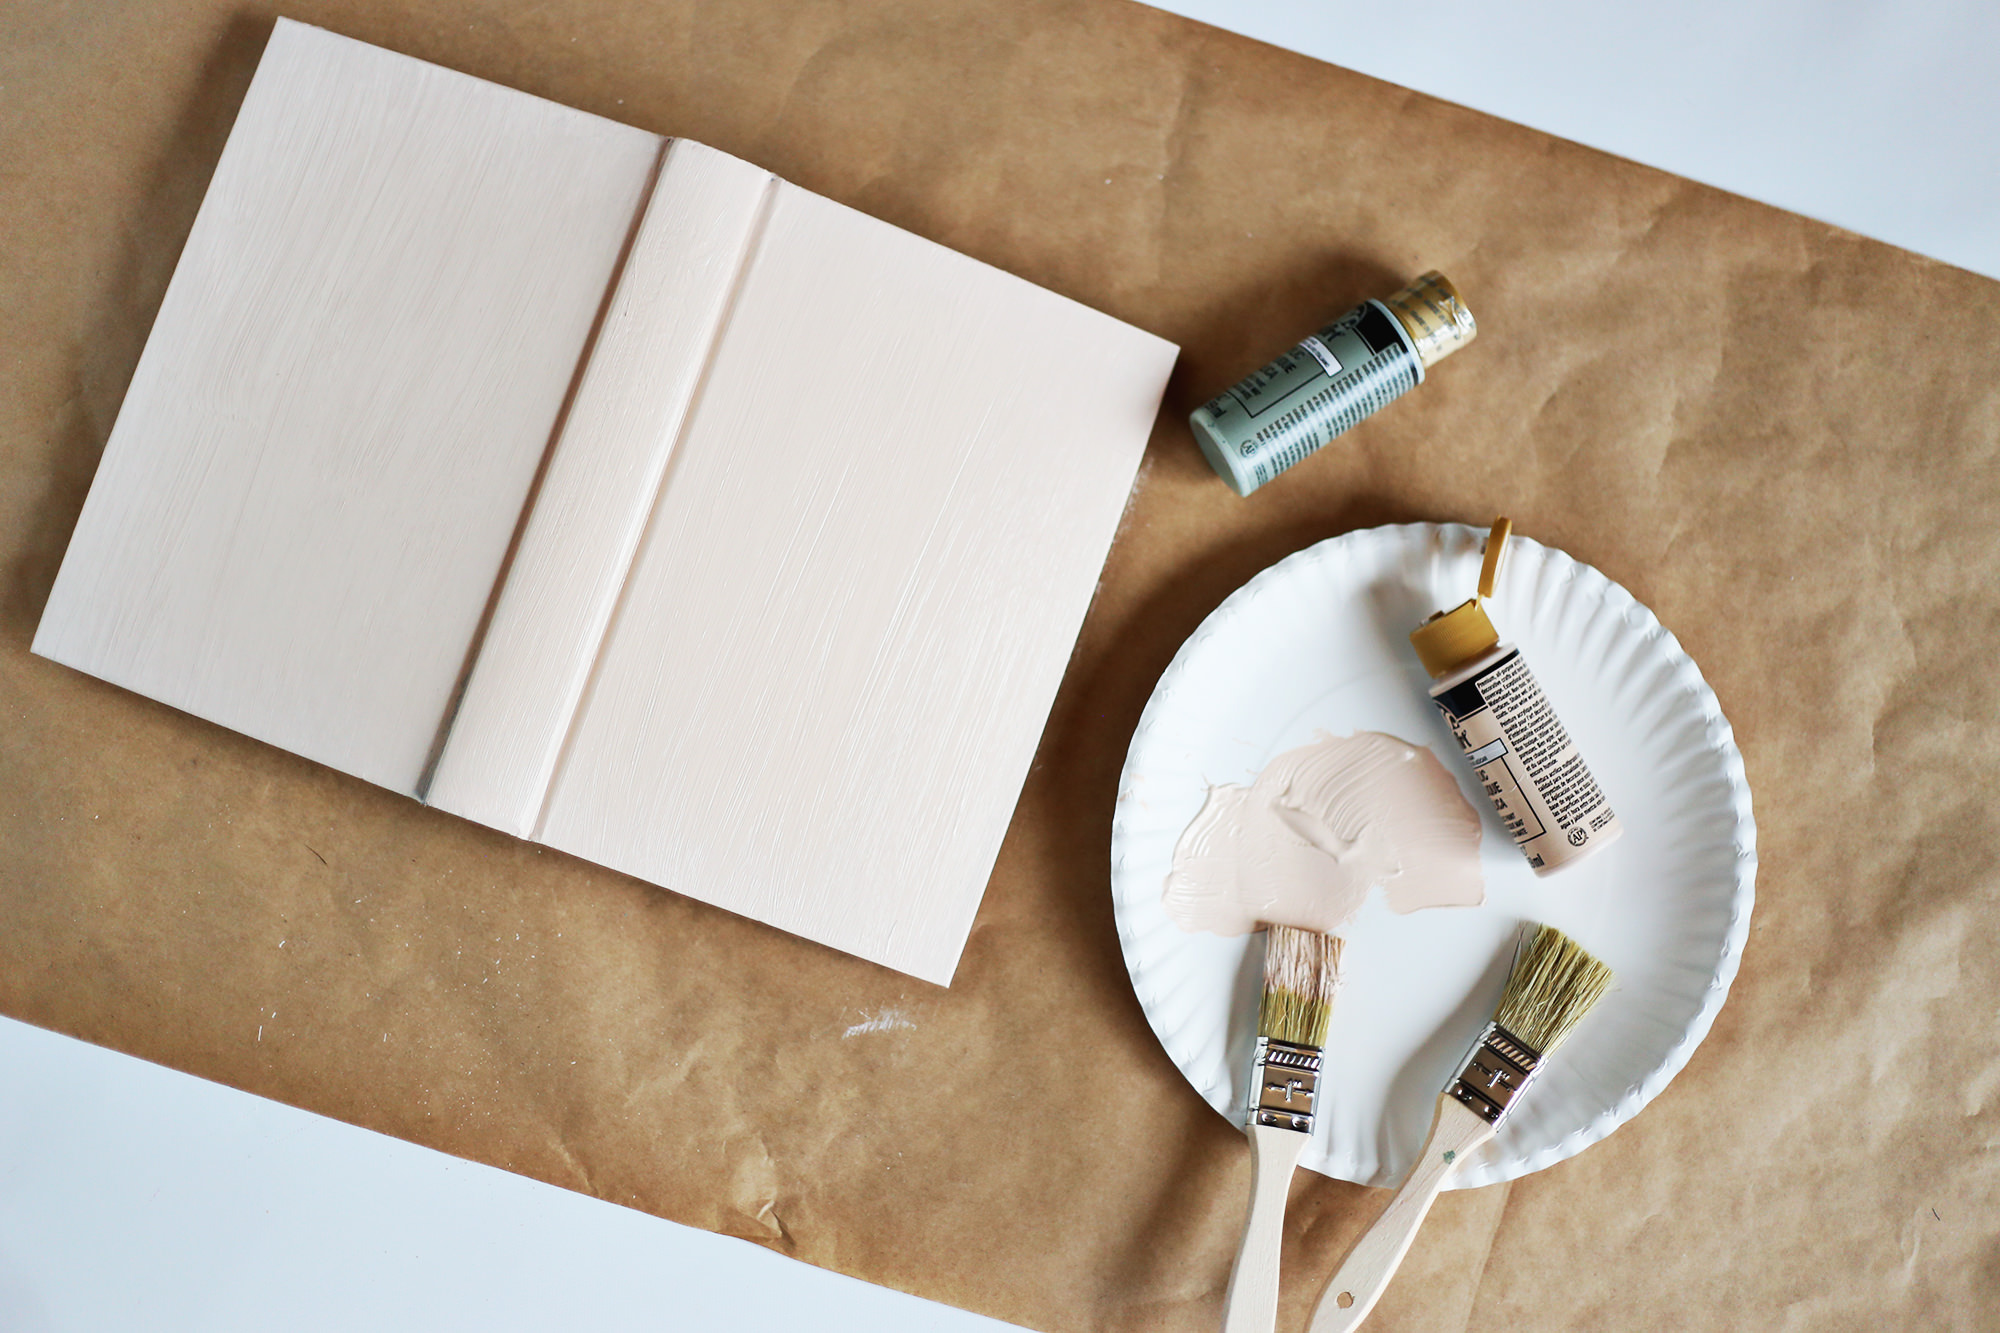 Painting old books in neutral colors makes them easy to use when styling a nightstand or a bookshelf!